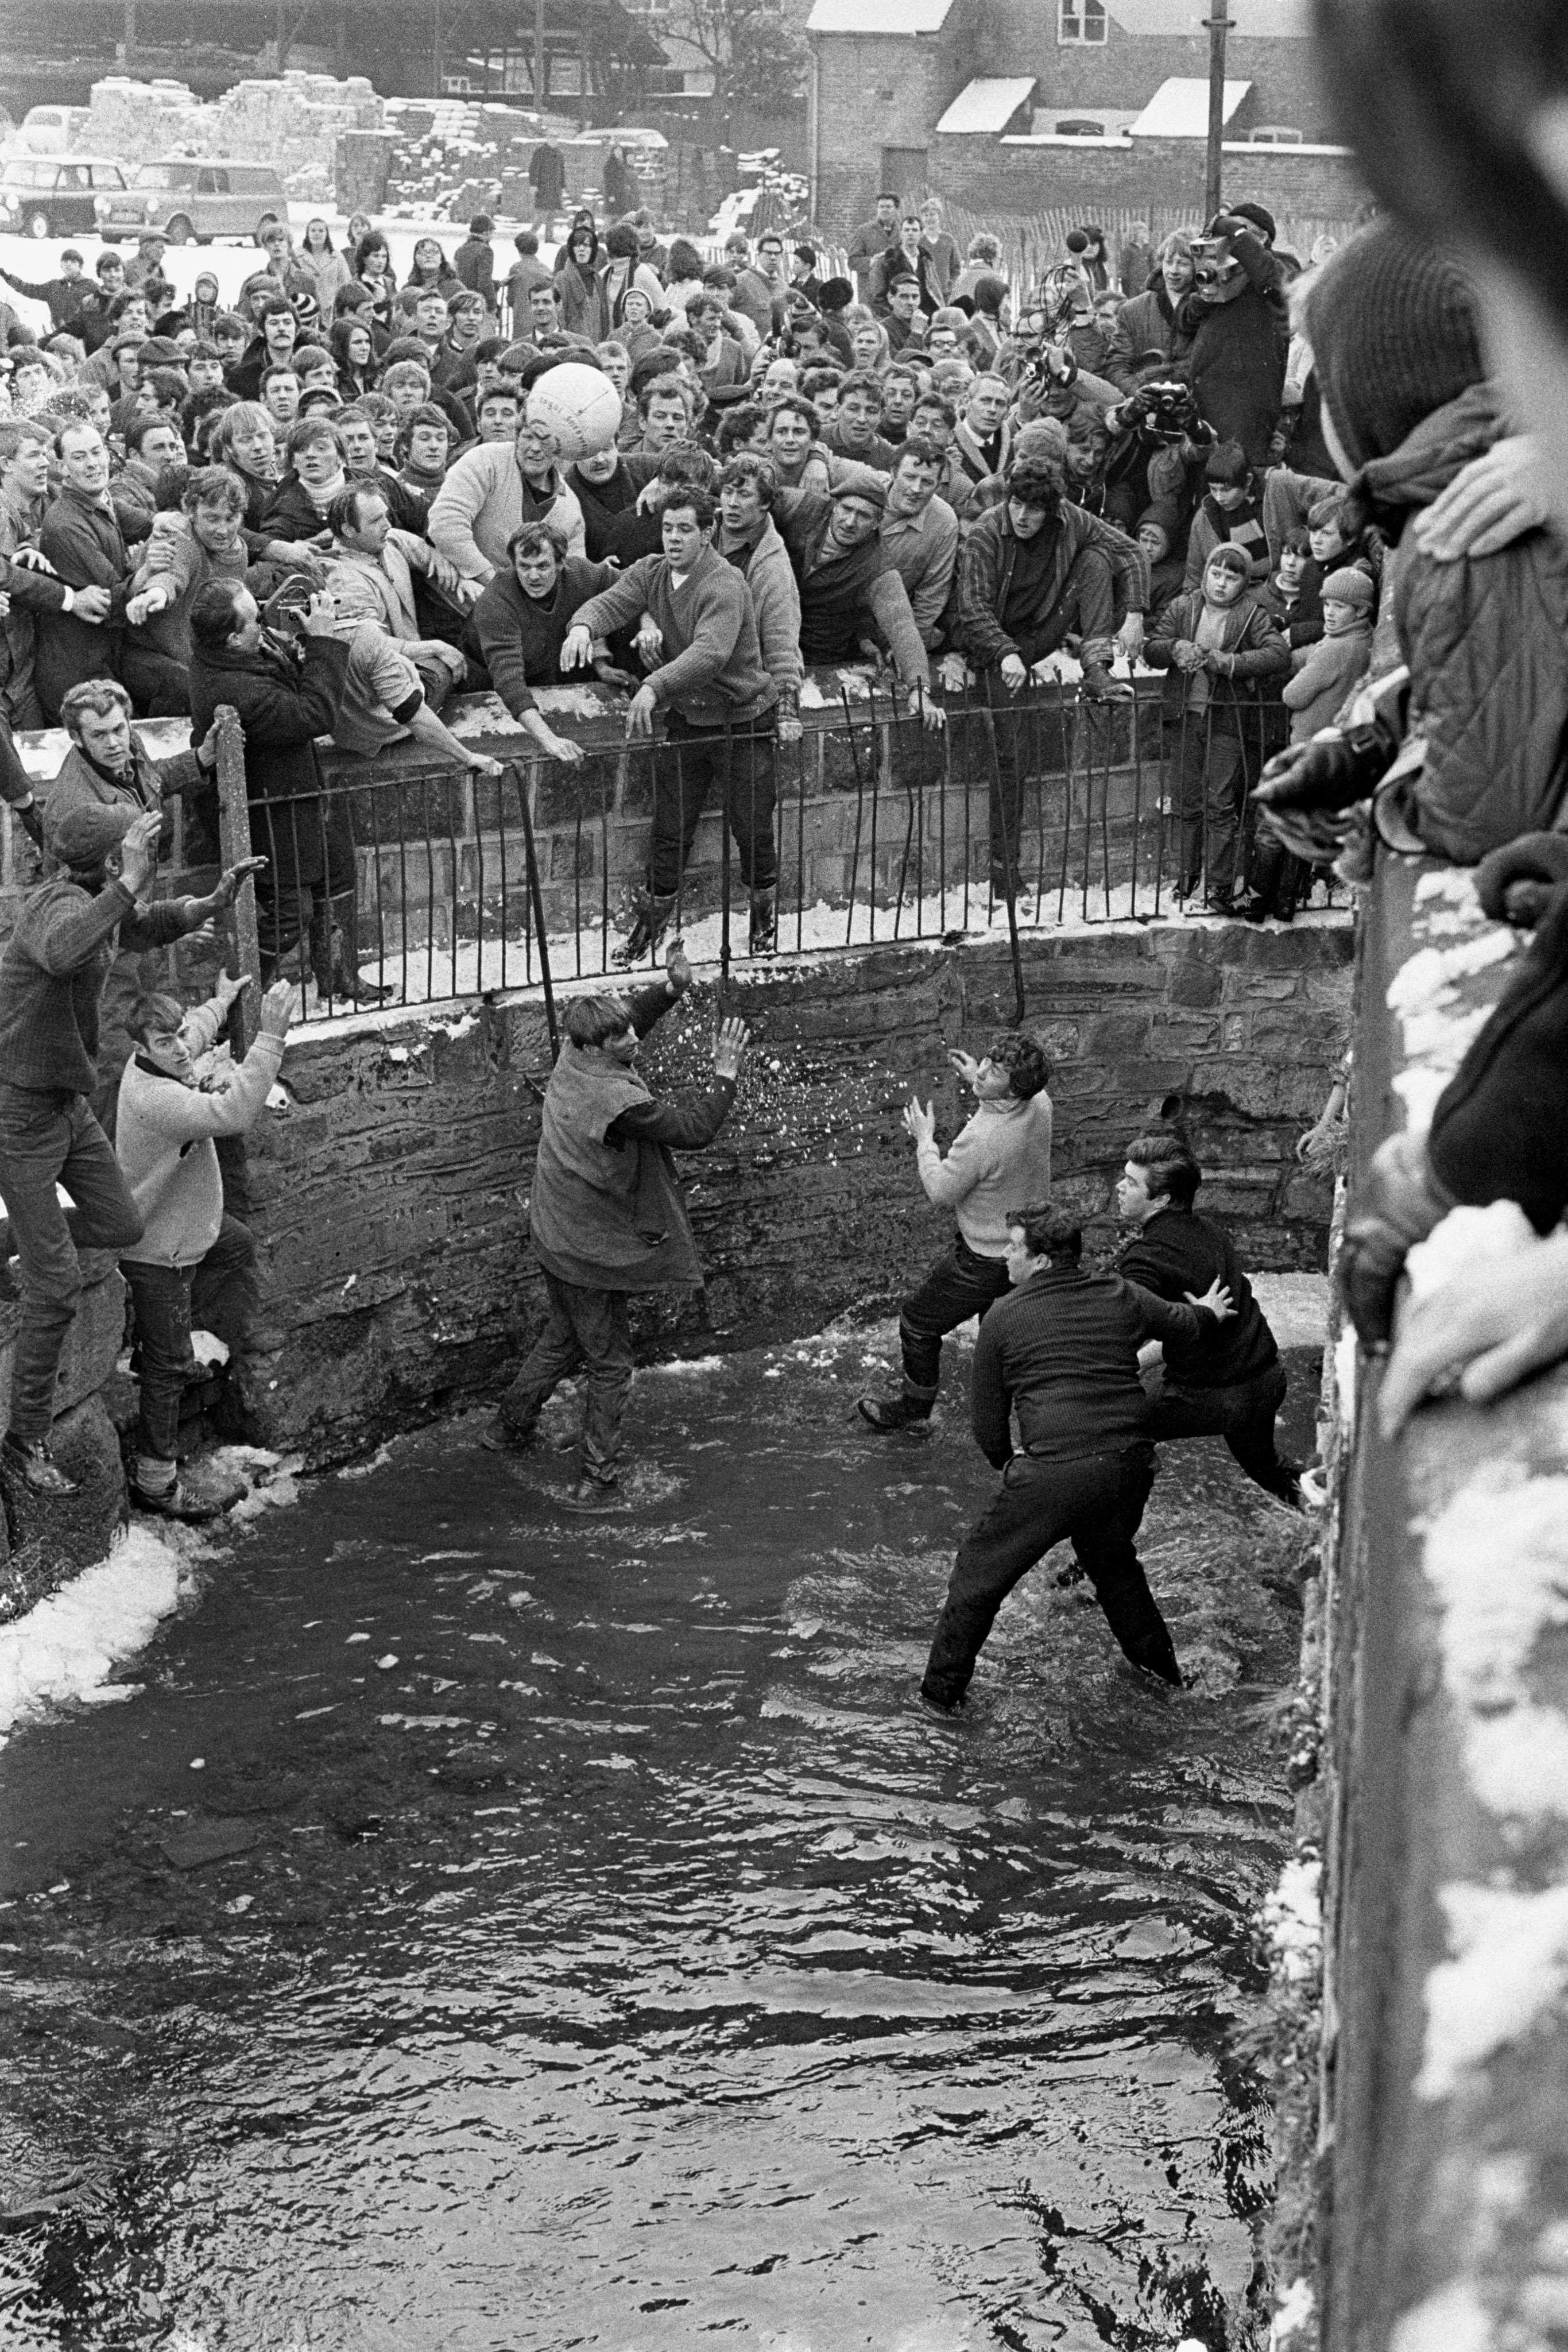 Black and white photo of men scrabbling river, and ball being thrown into it